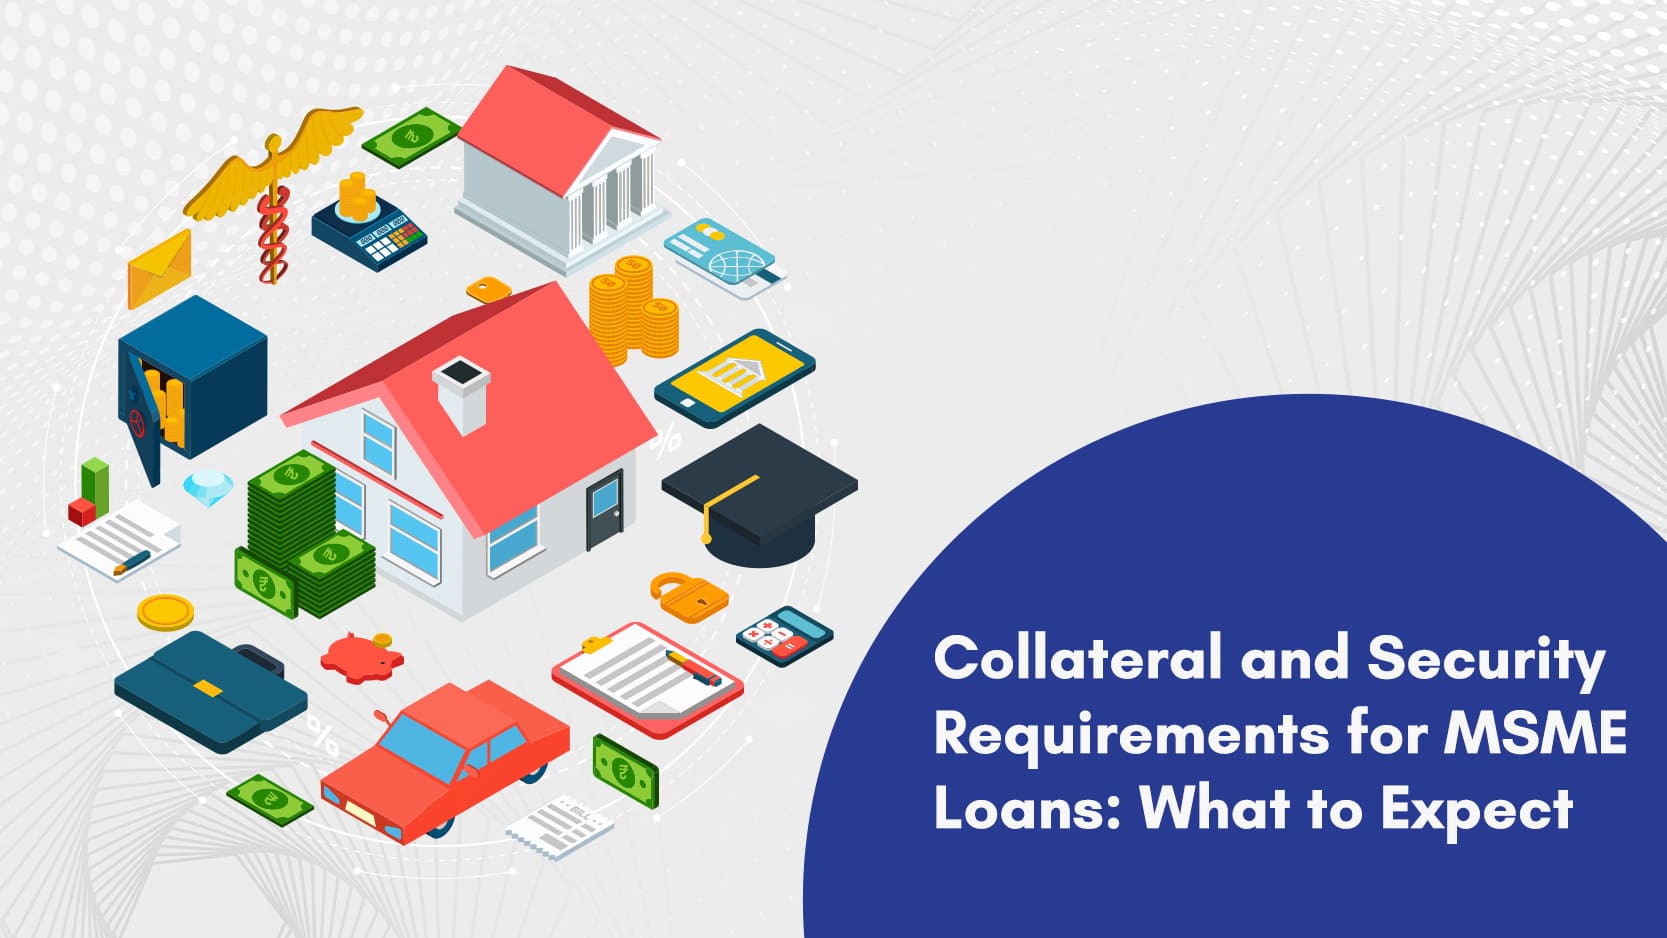 Collateral and Security Requirements for MSME Loans: What to Expect